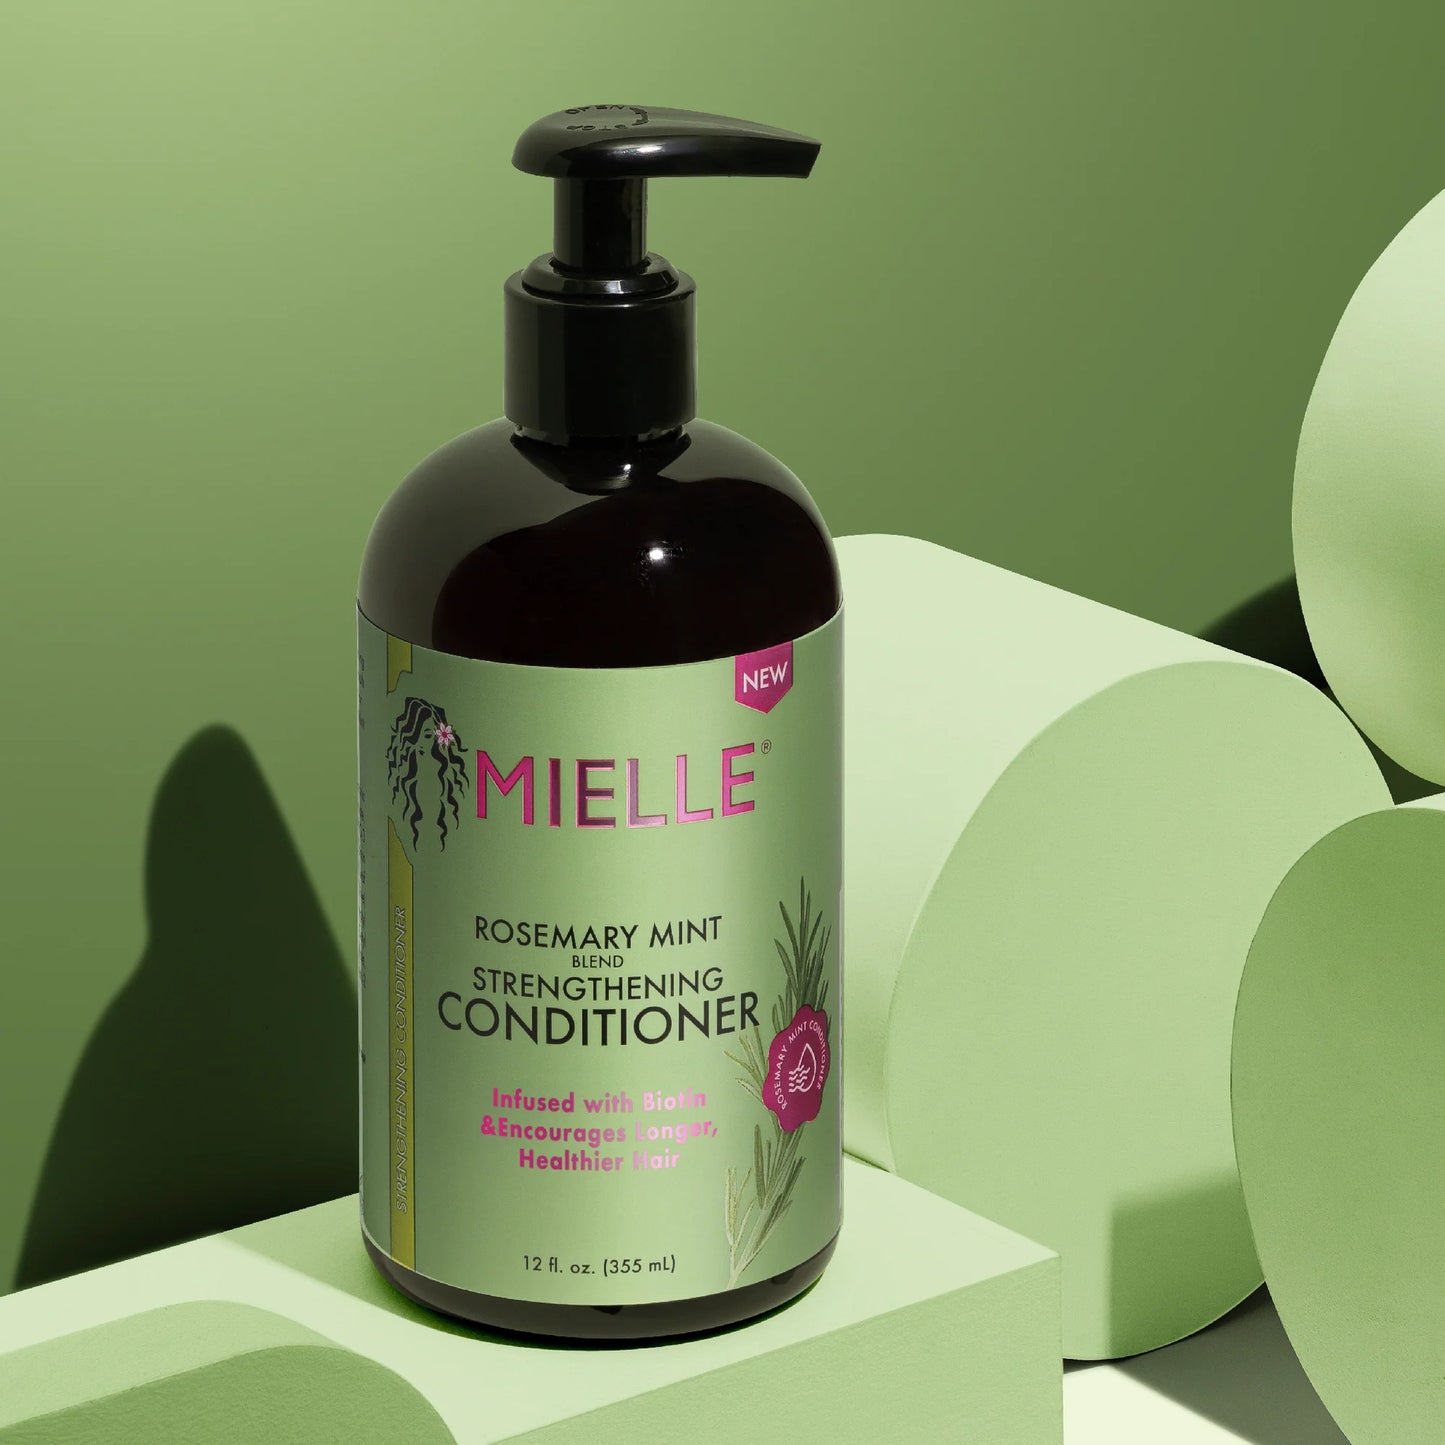 MIELLE - Rosemary Mint Strengthening Conditioner, 355ml